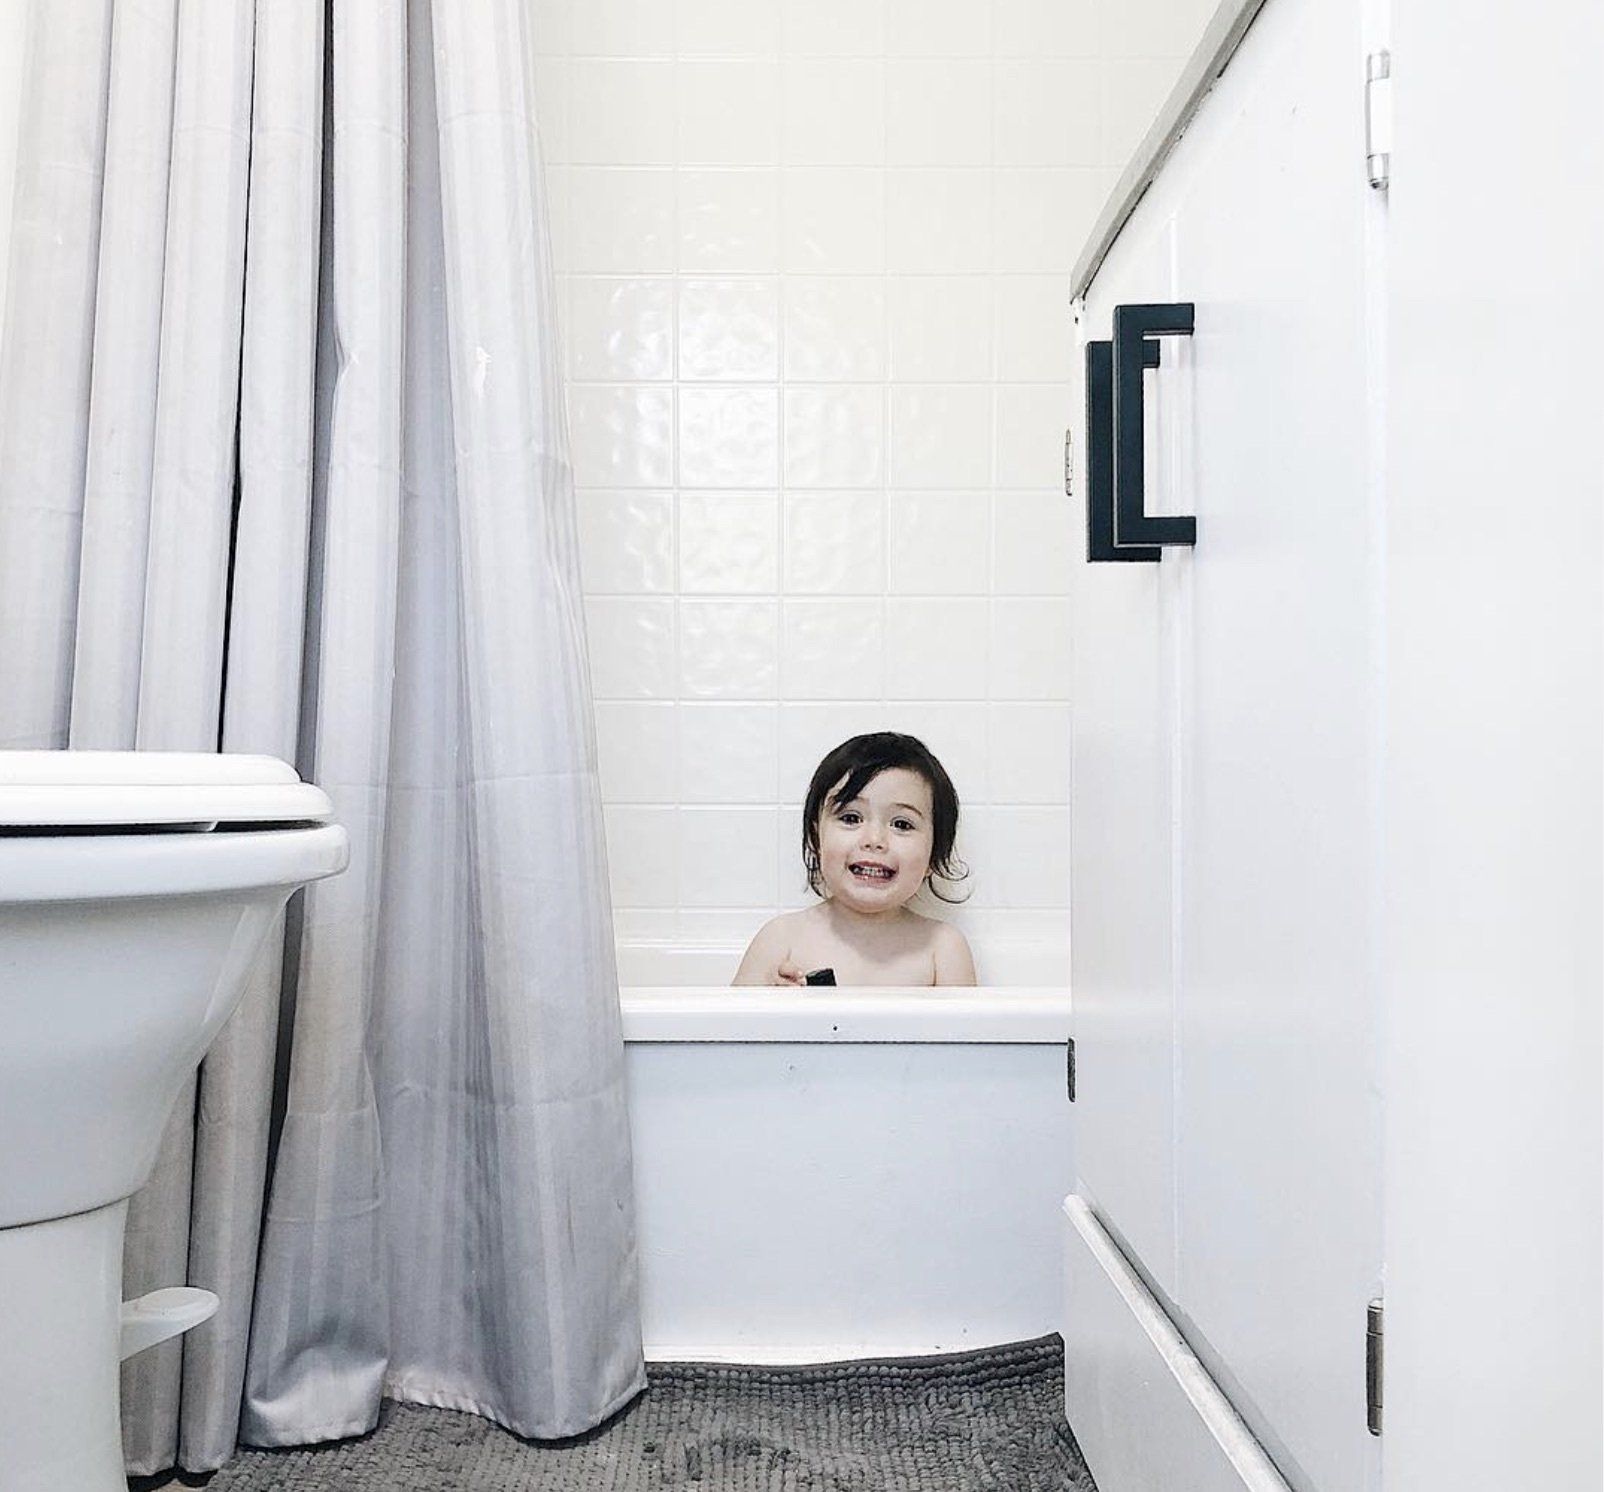 One of the kids from the Maisey family sits in the bathtub that's part of the skoolie interior.